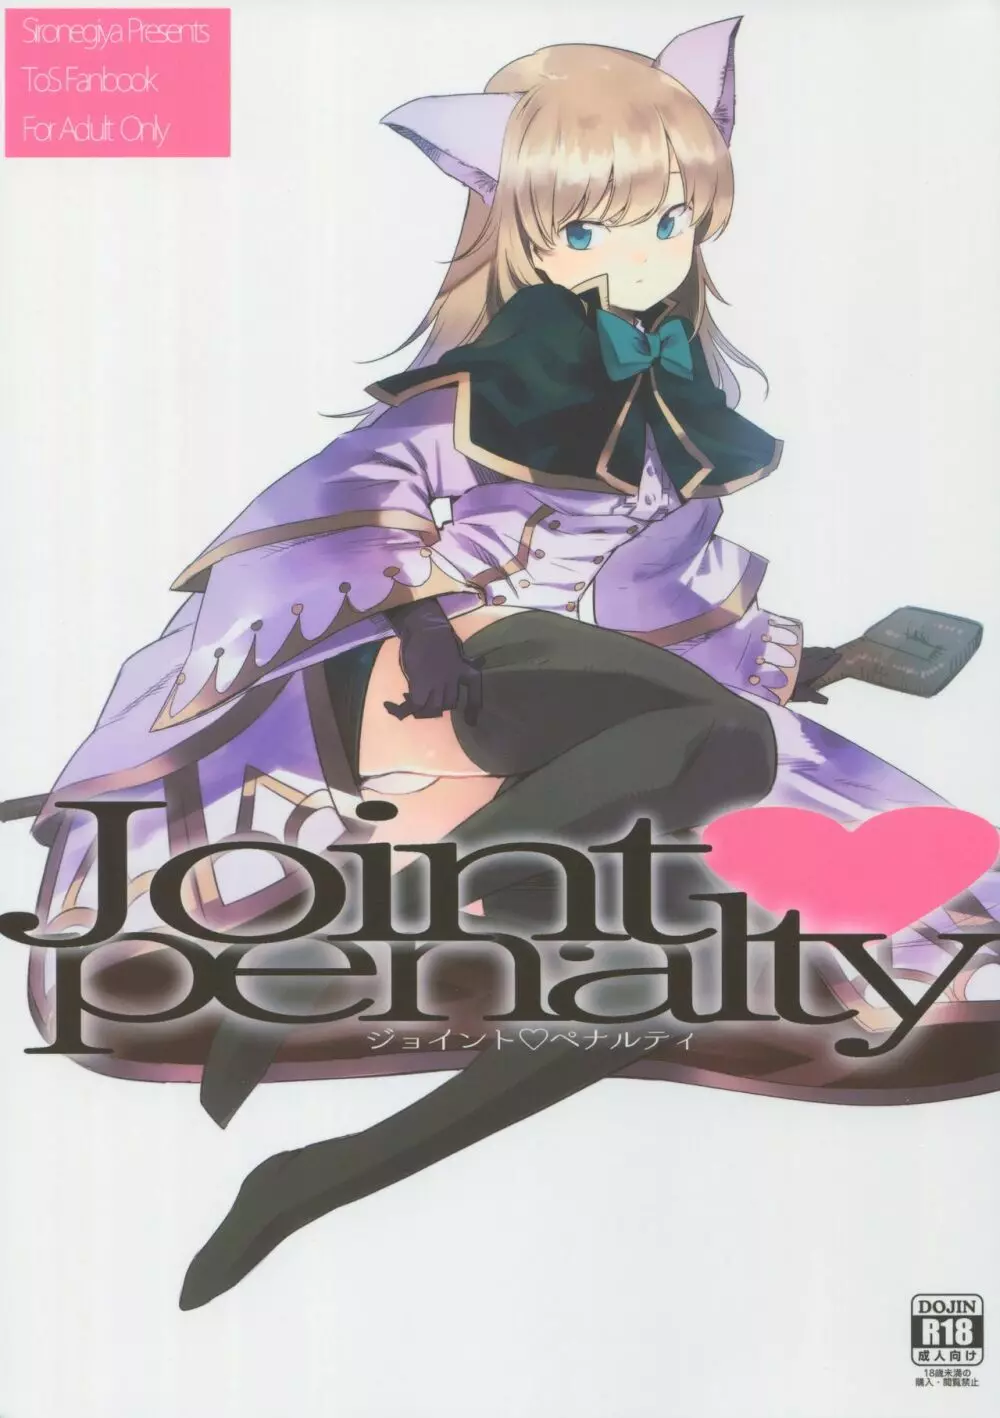 Joint penalty 1ページ